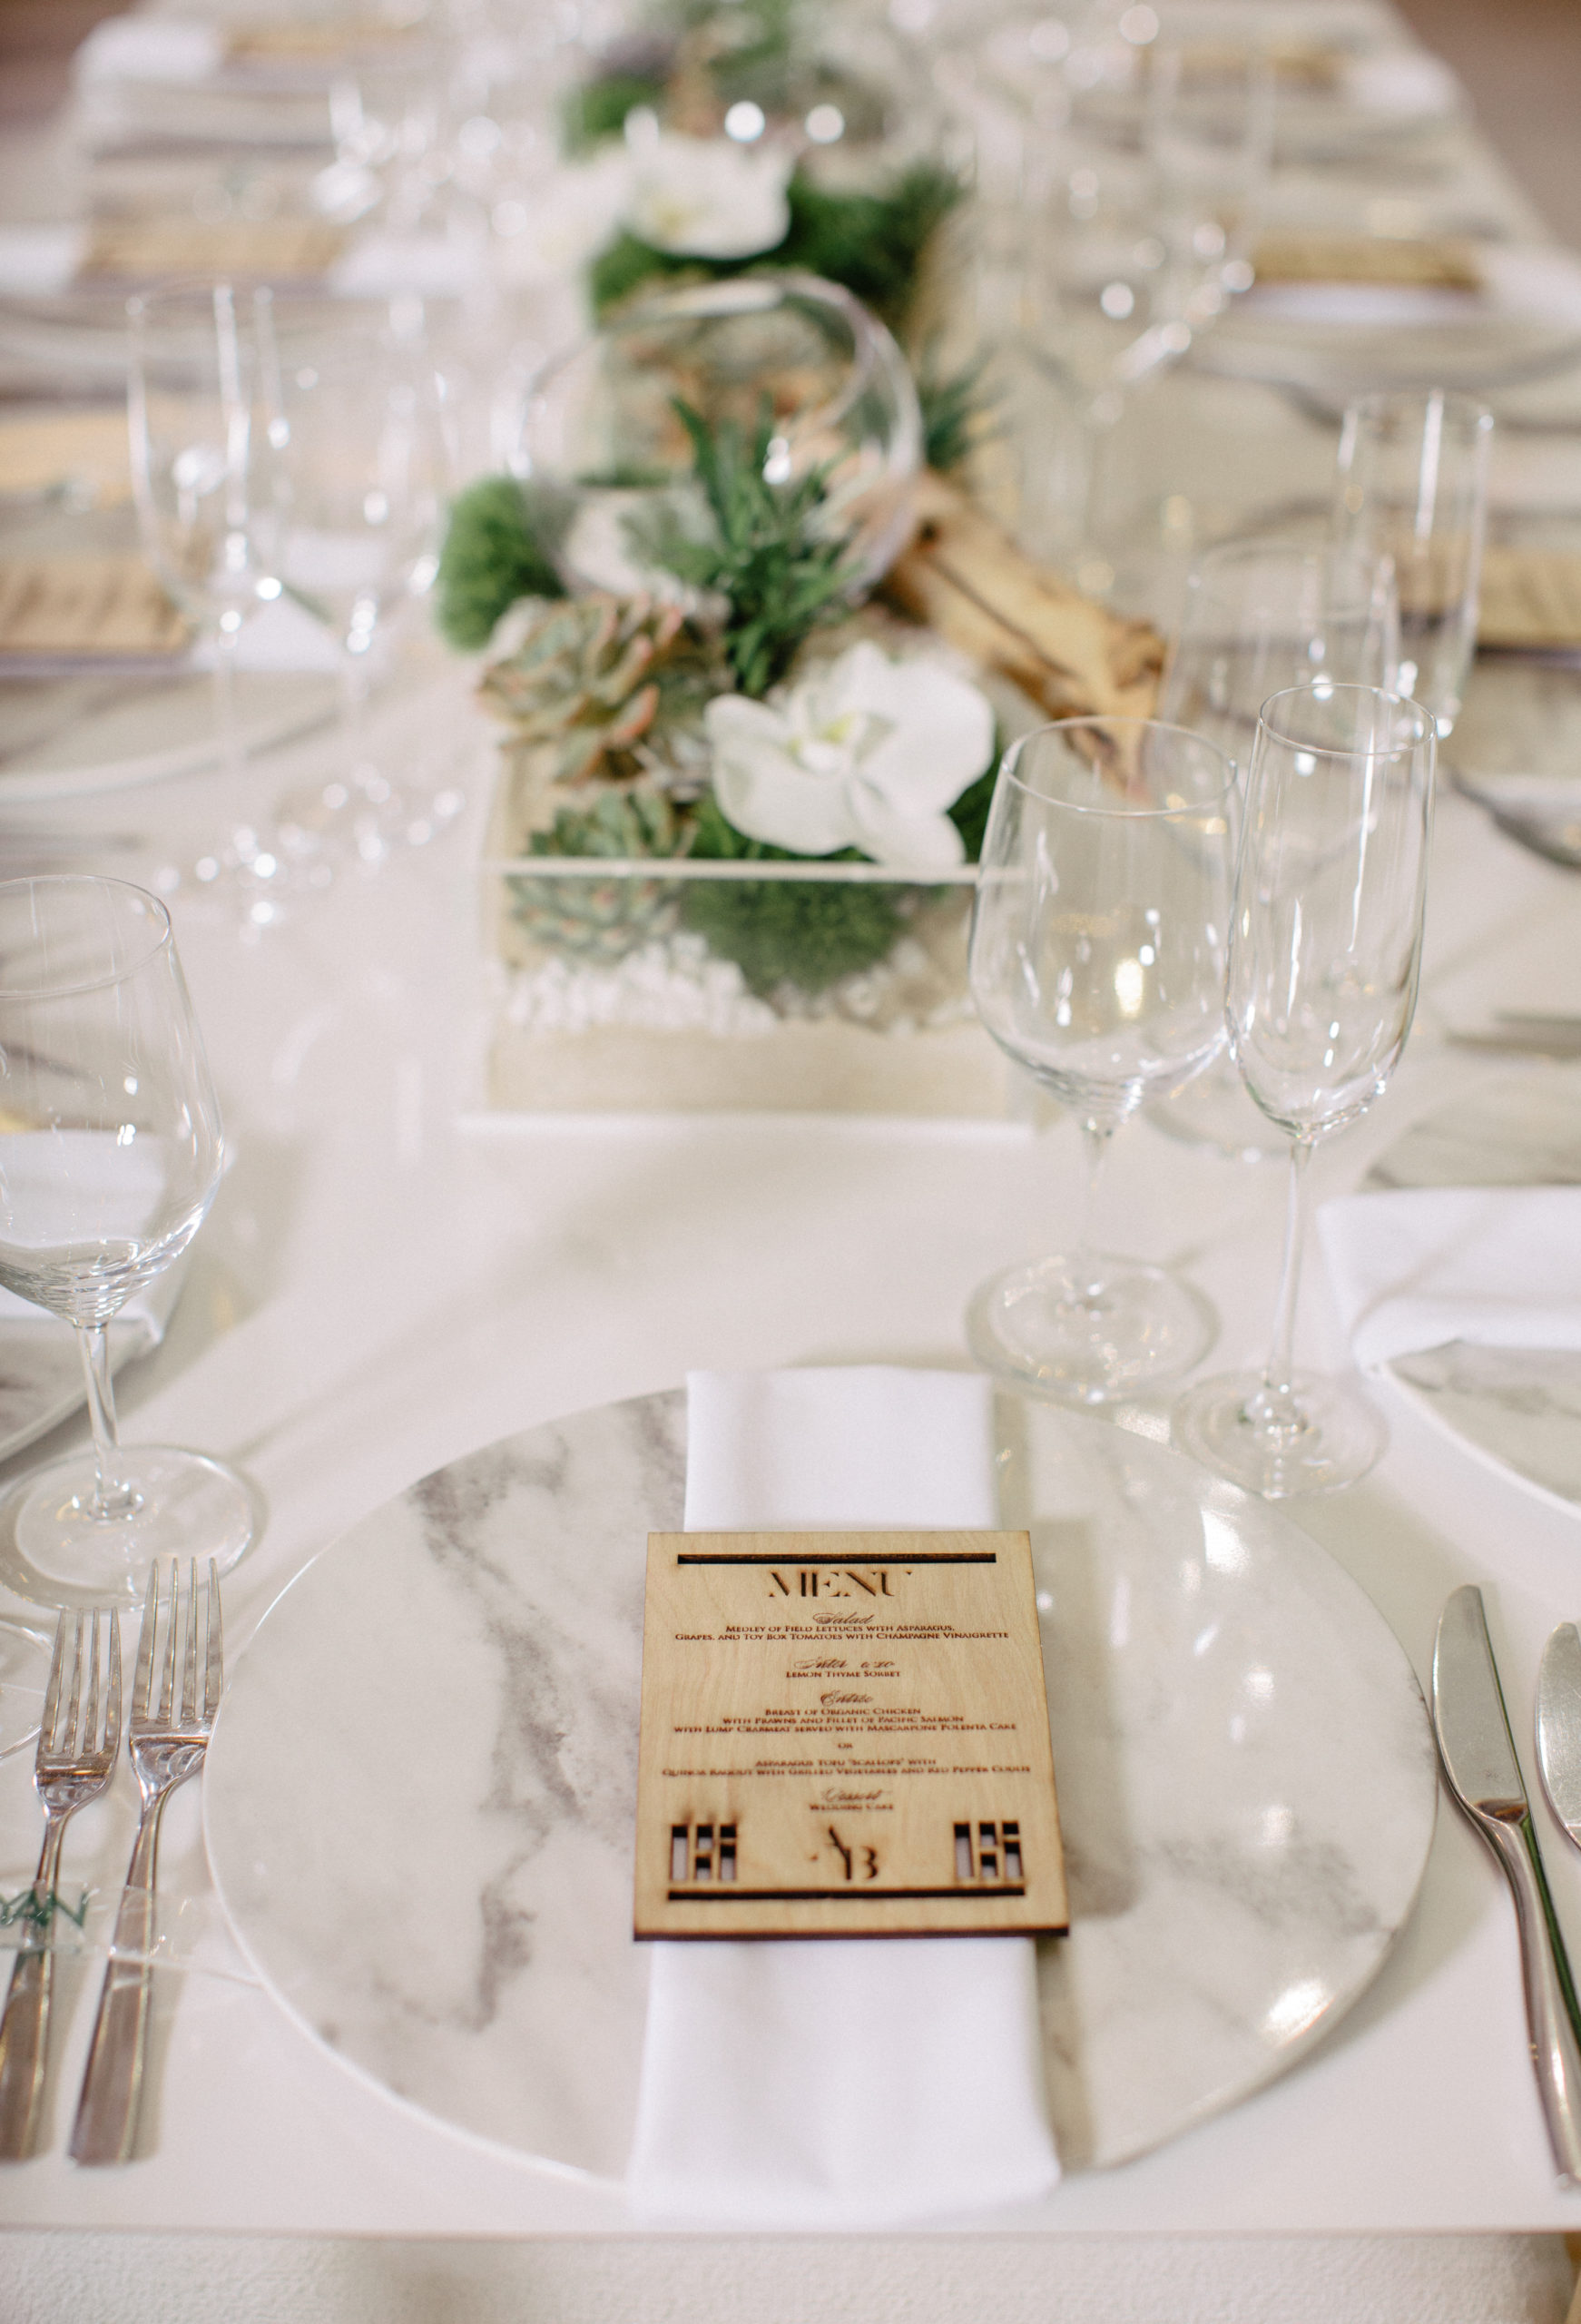 Acrylic wedding table with white wood dowel chairs and statement chairs at either end, featuring marble charger plates and resin name plates that served as unique place cards with a wood engraved menu buckle